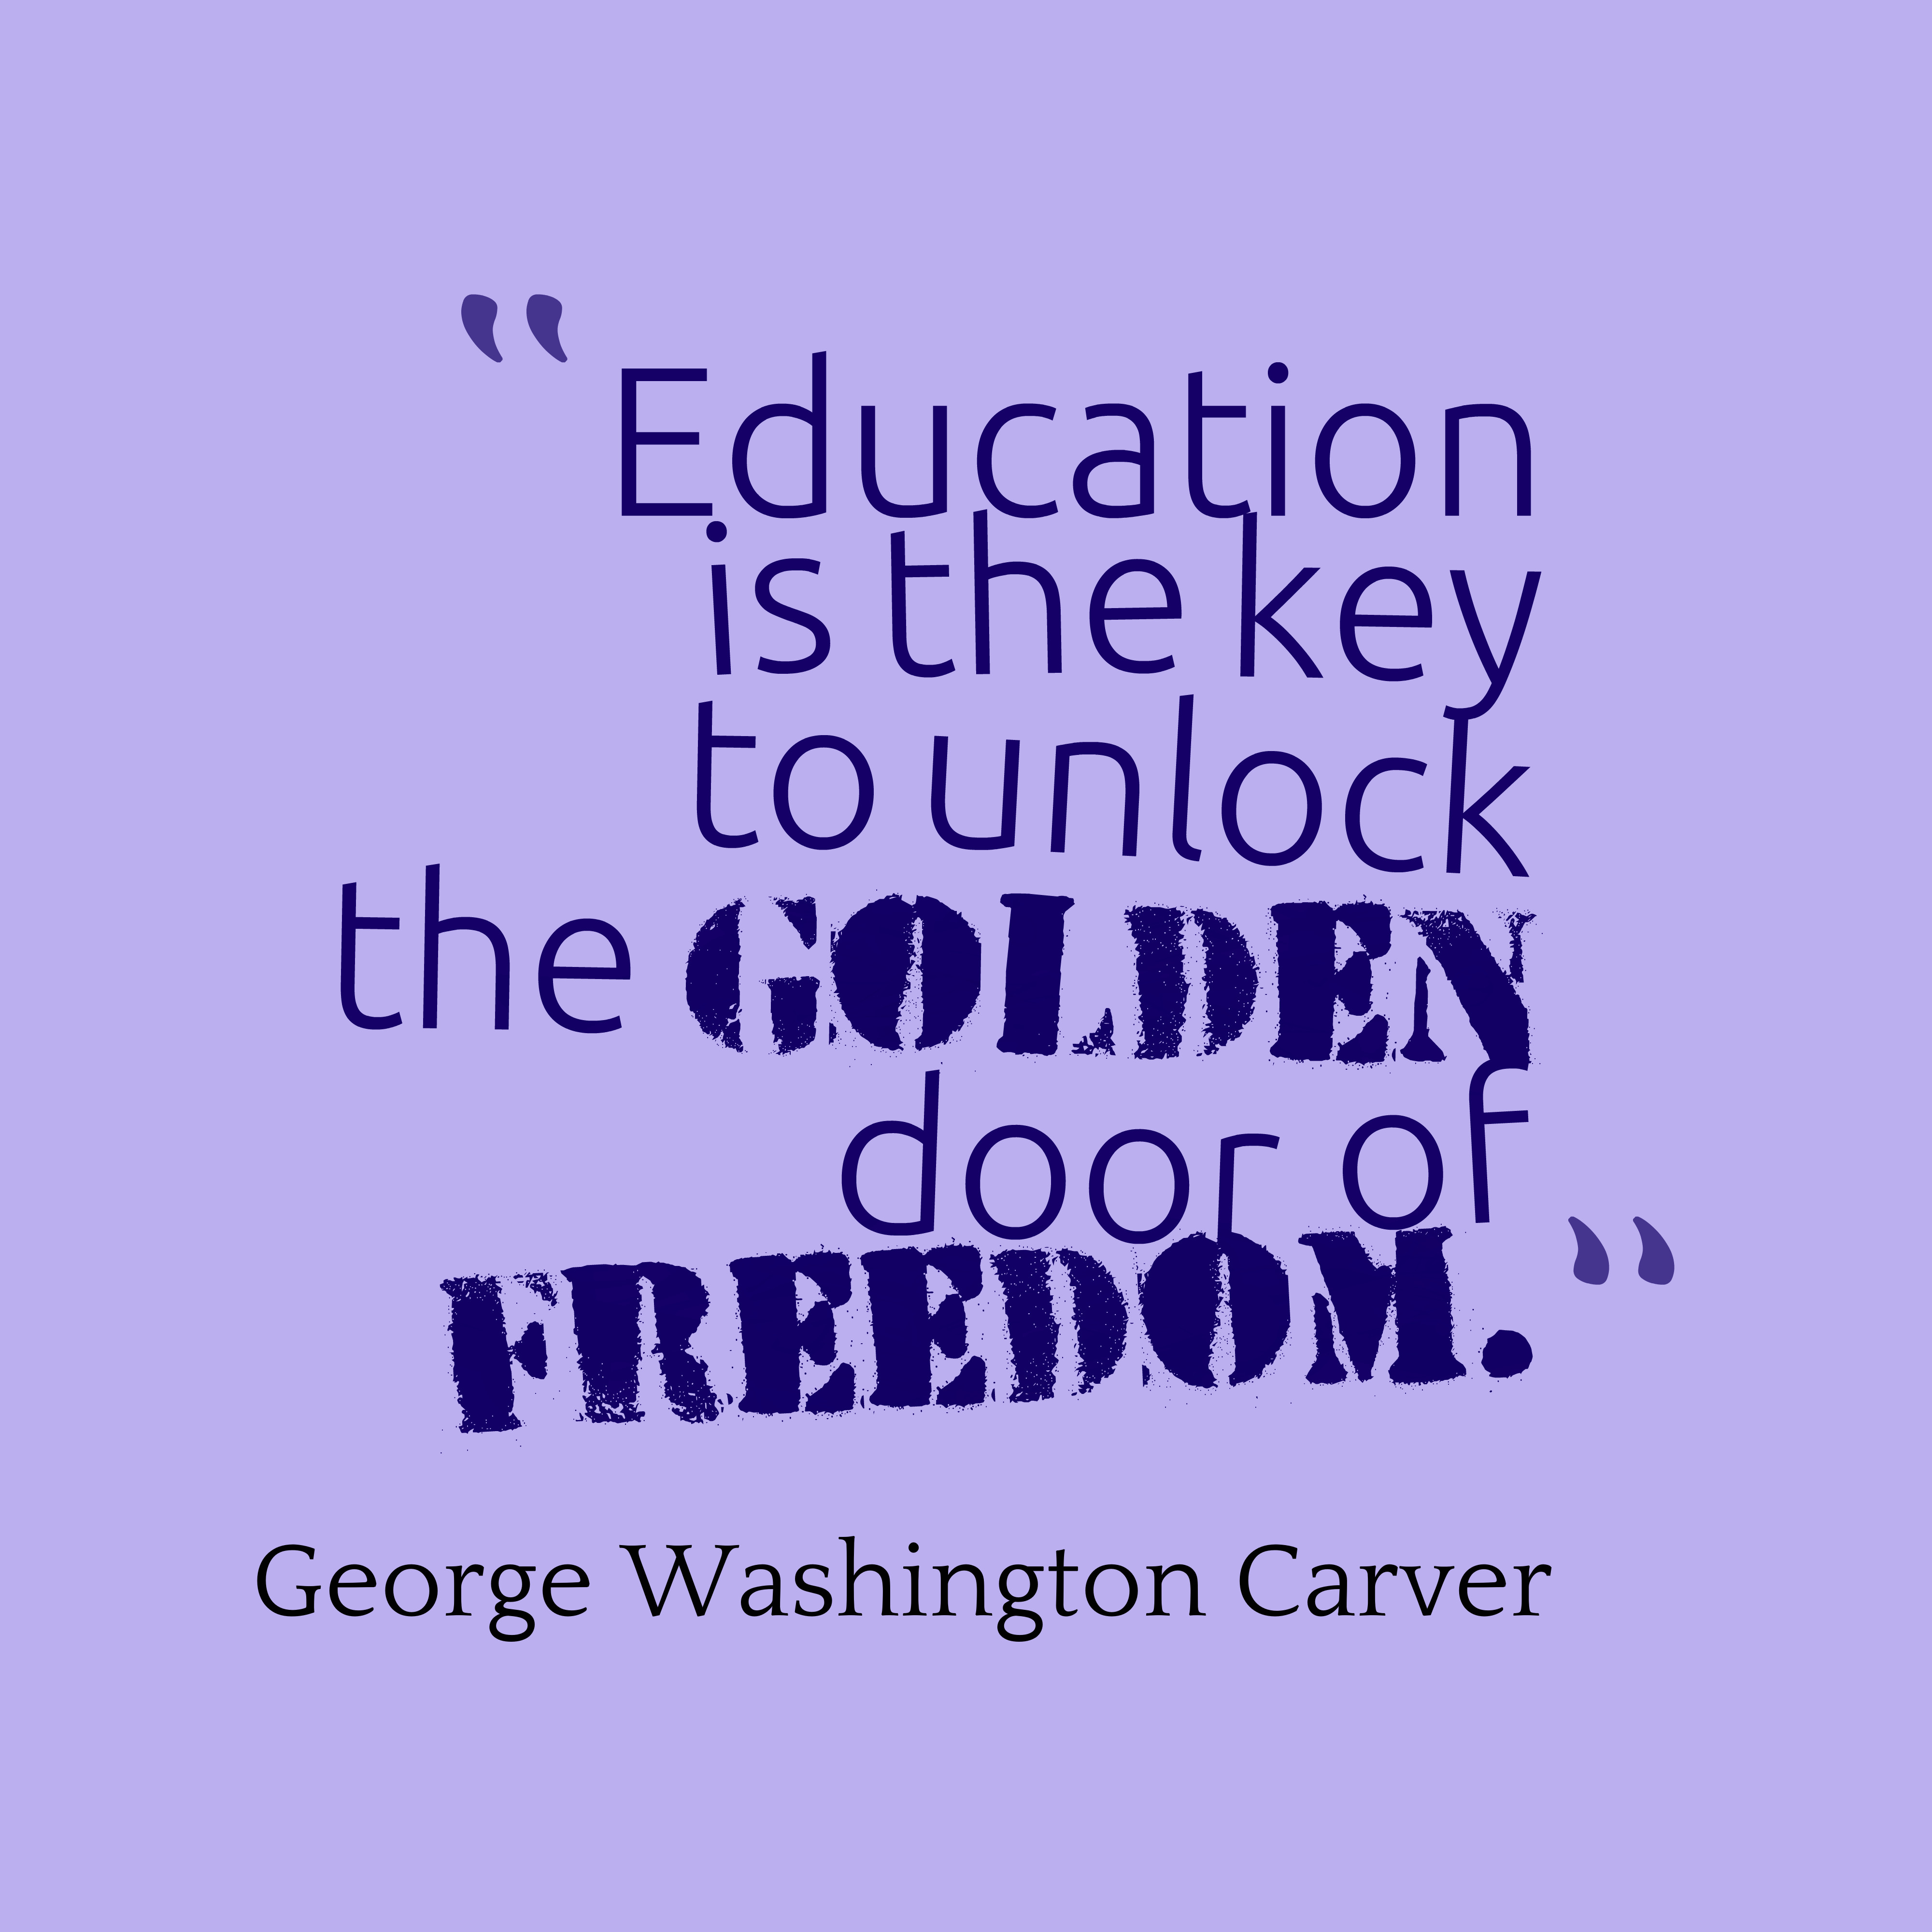 Education Is The Key Quote
 George Washington Carver quote about education